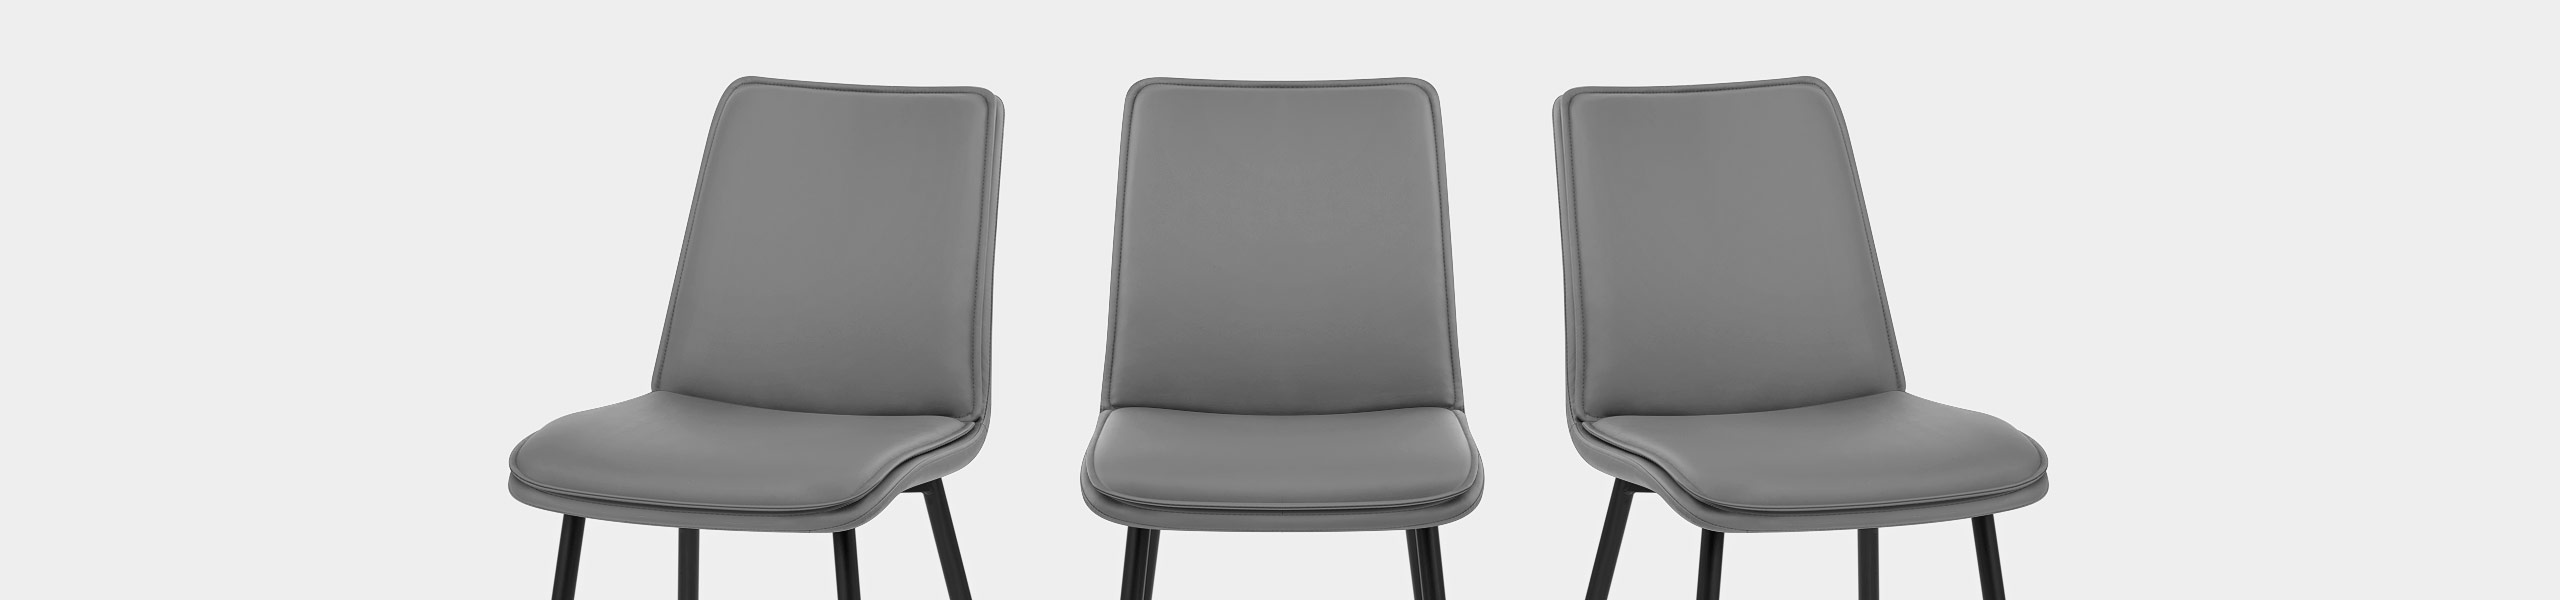 Abi Dining Chair Grey Video Banner